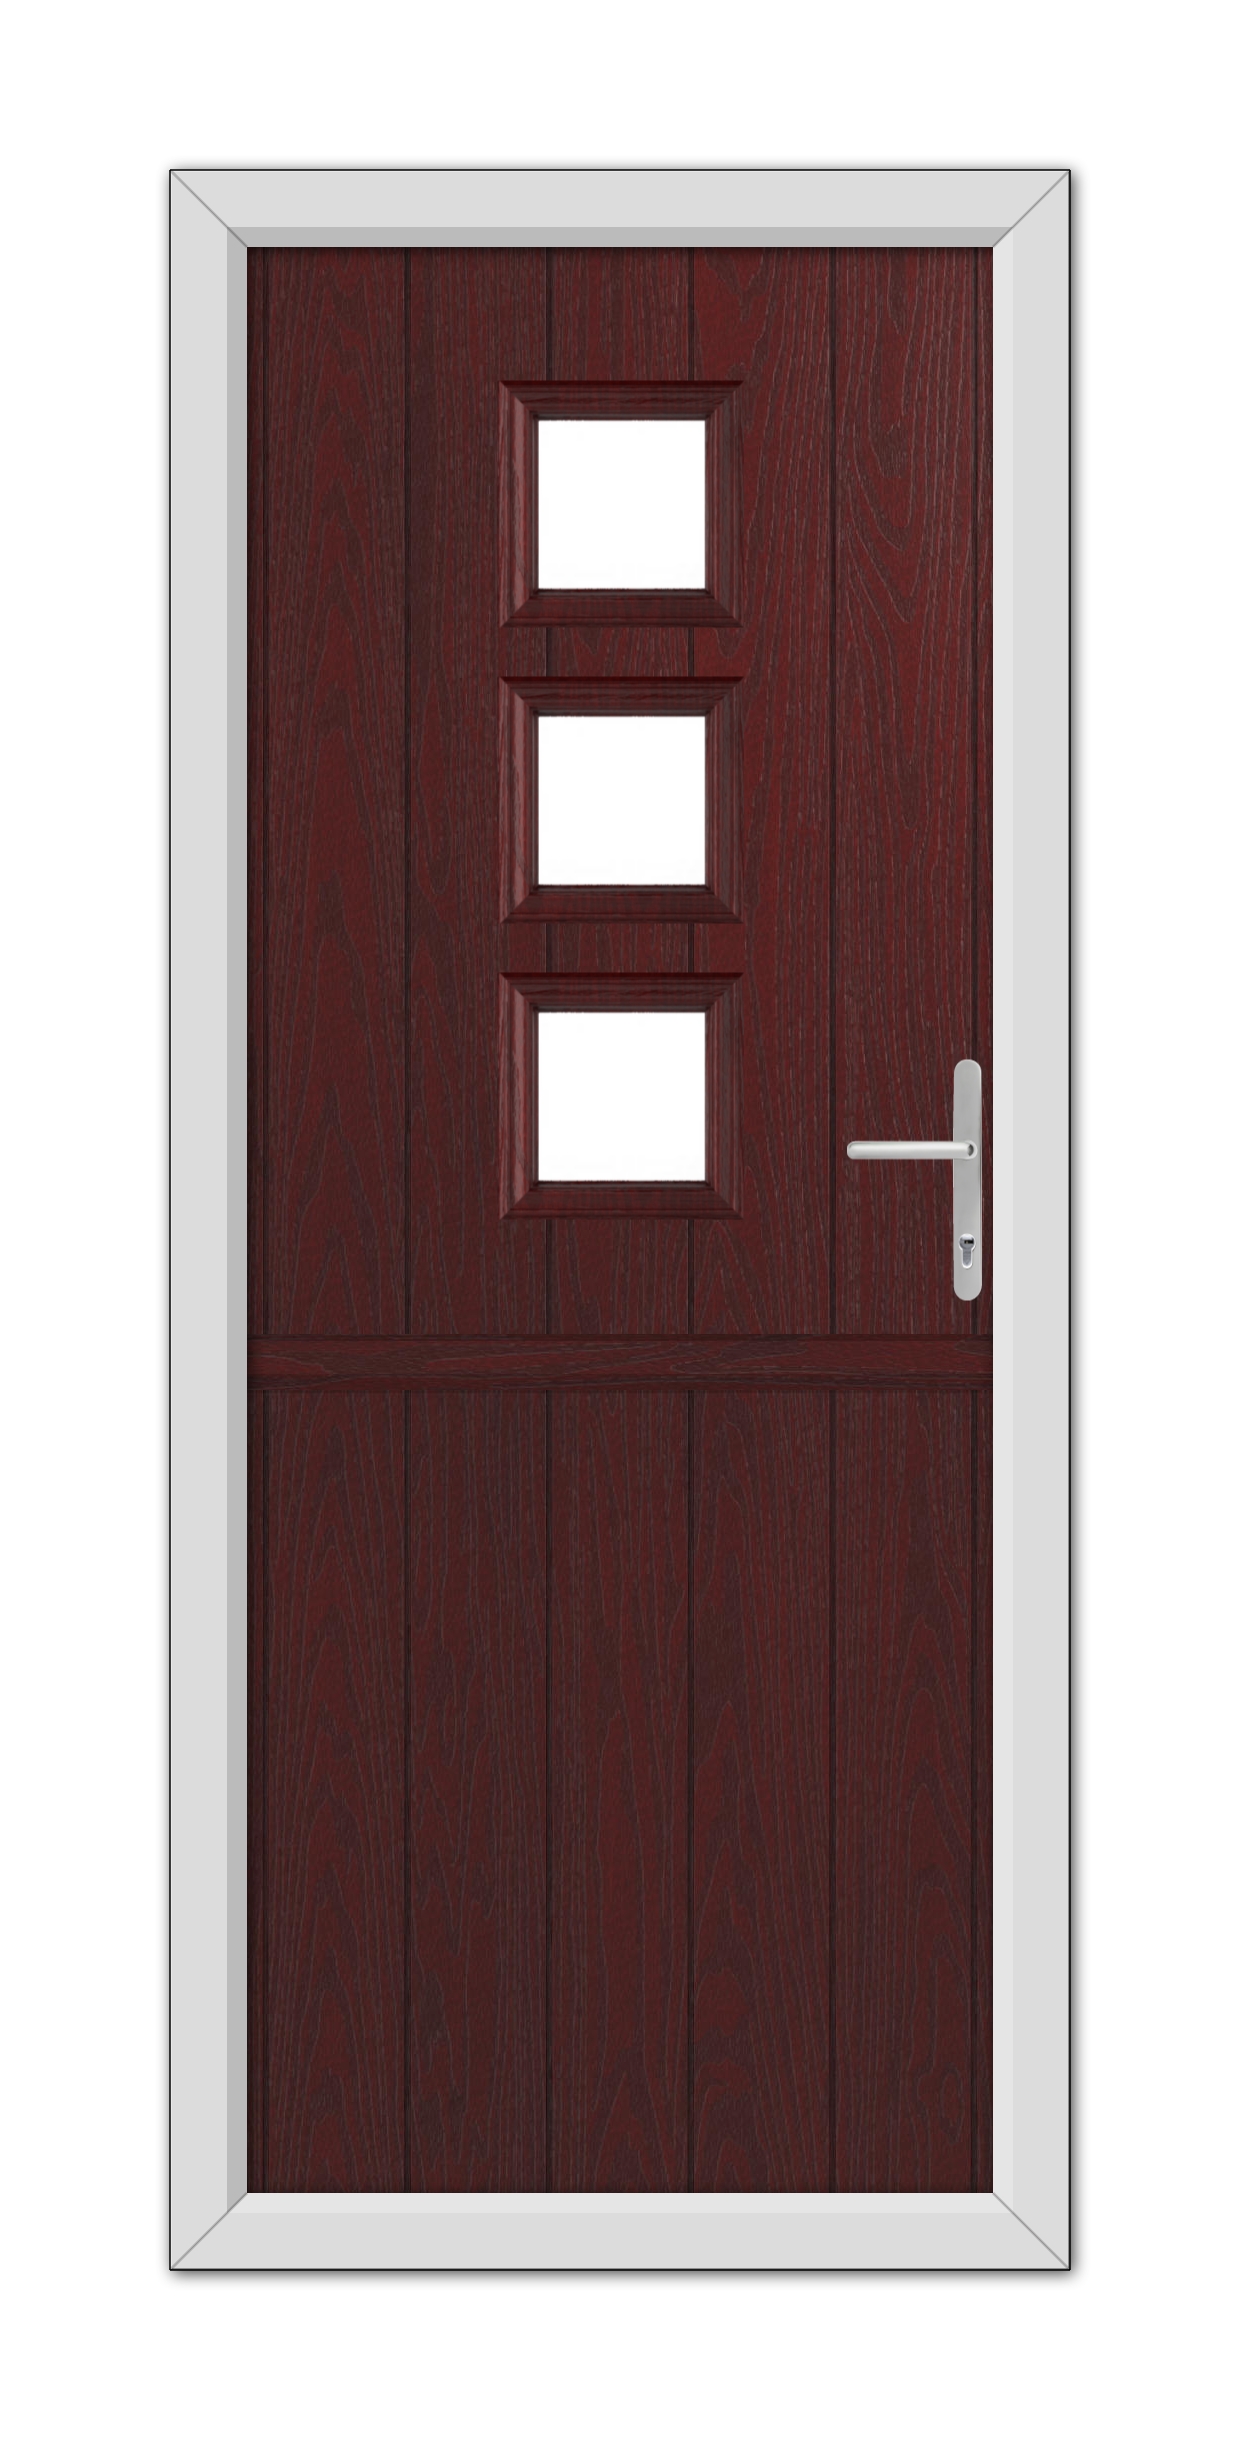 A modern Rosewood Montrose Stable Composite Door 48mm Timber Core with three horizontal glass panels, framed in white with a metallic handle on the right side.